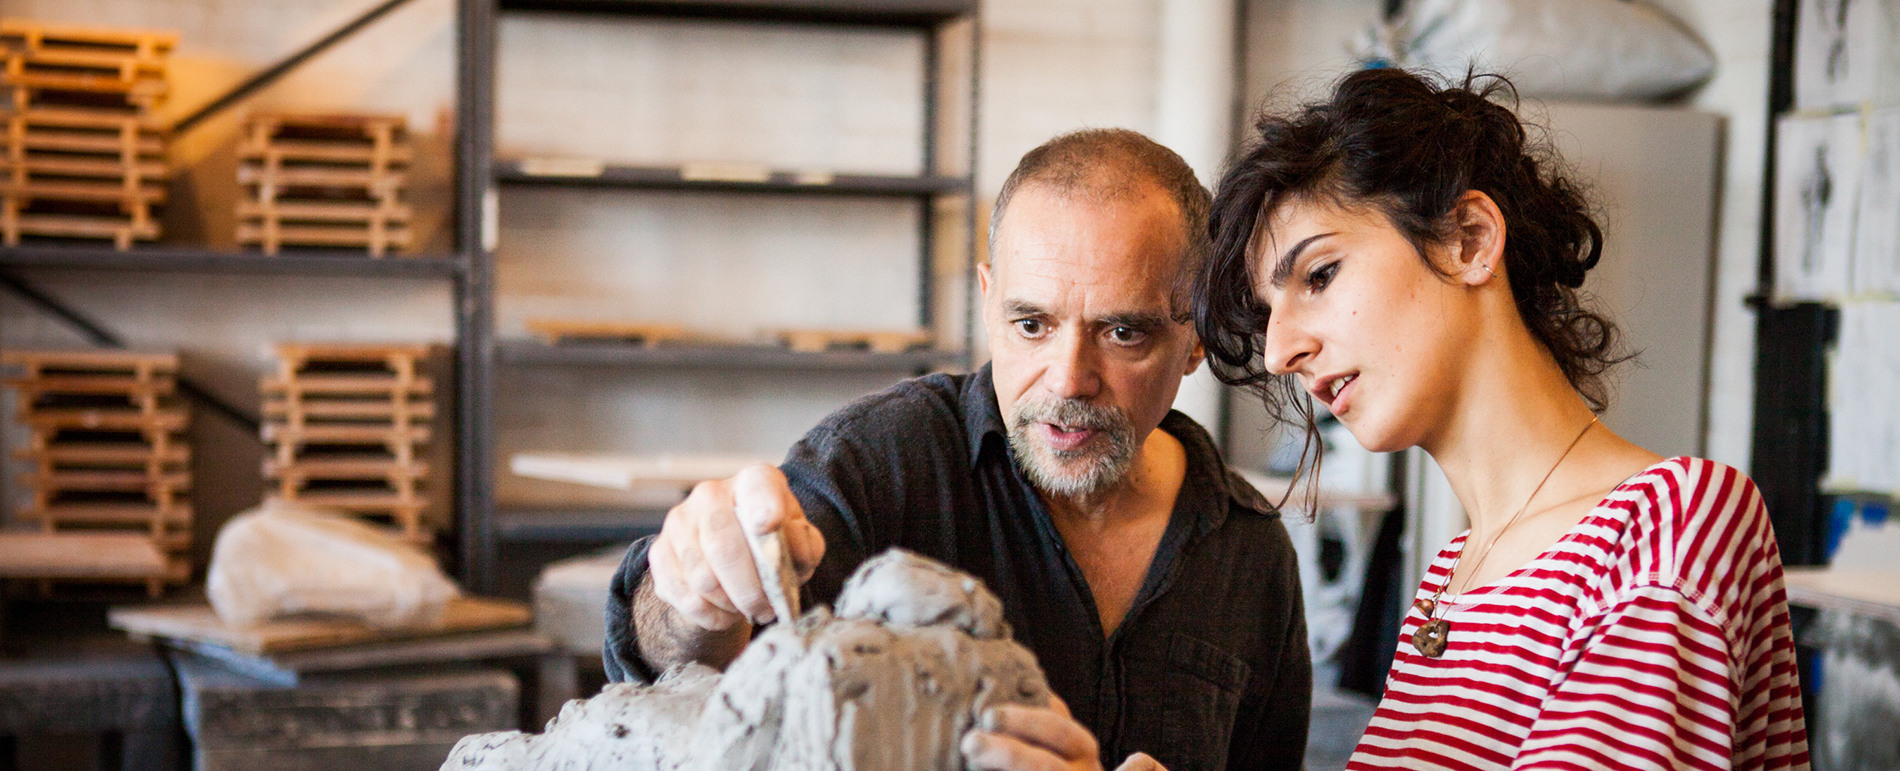 A professor points at an in-progress clay structure, giving feedback to a student.